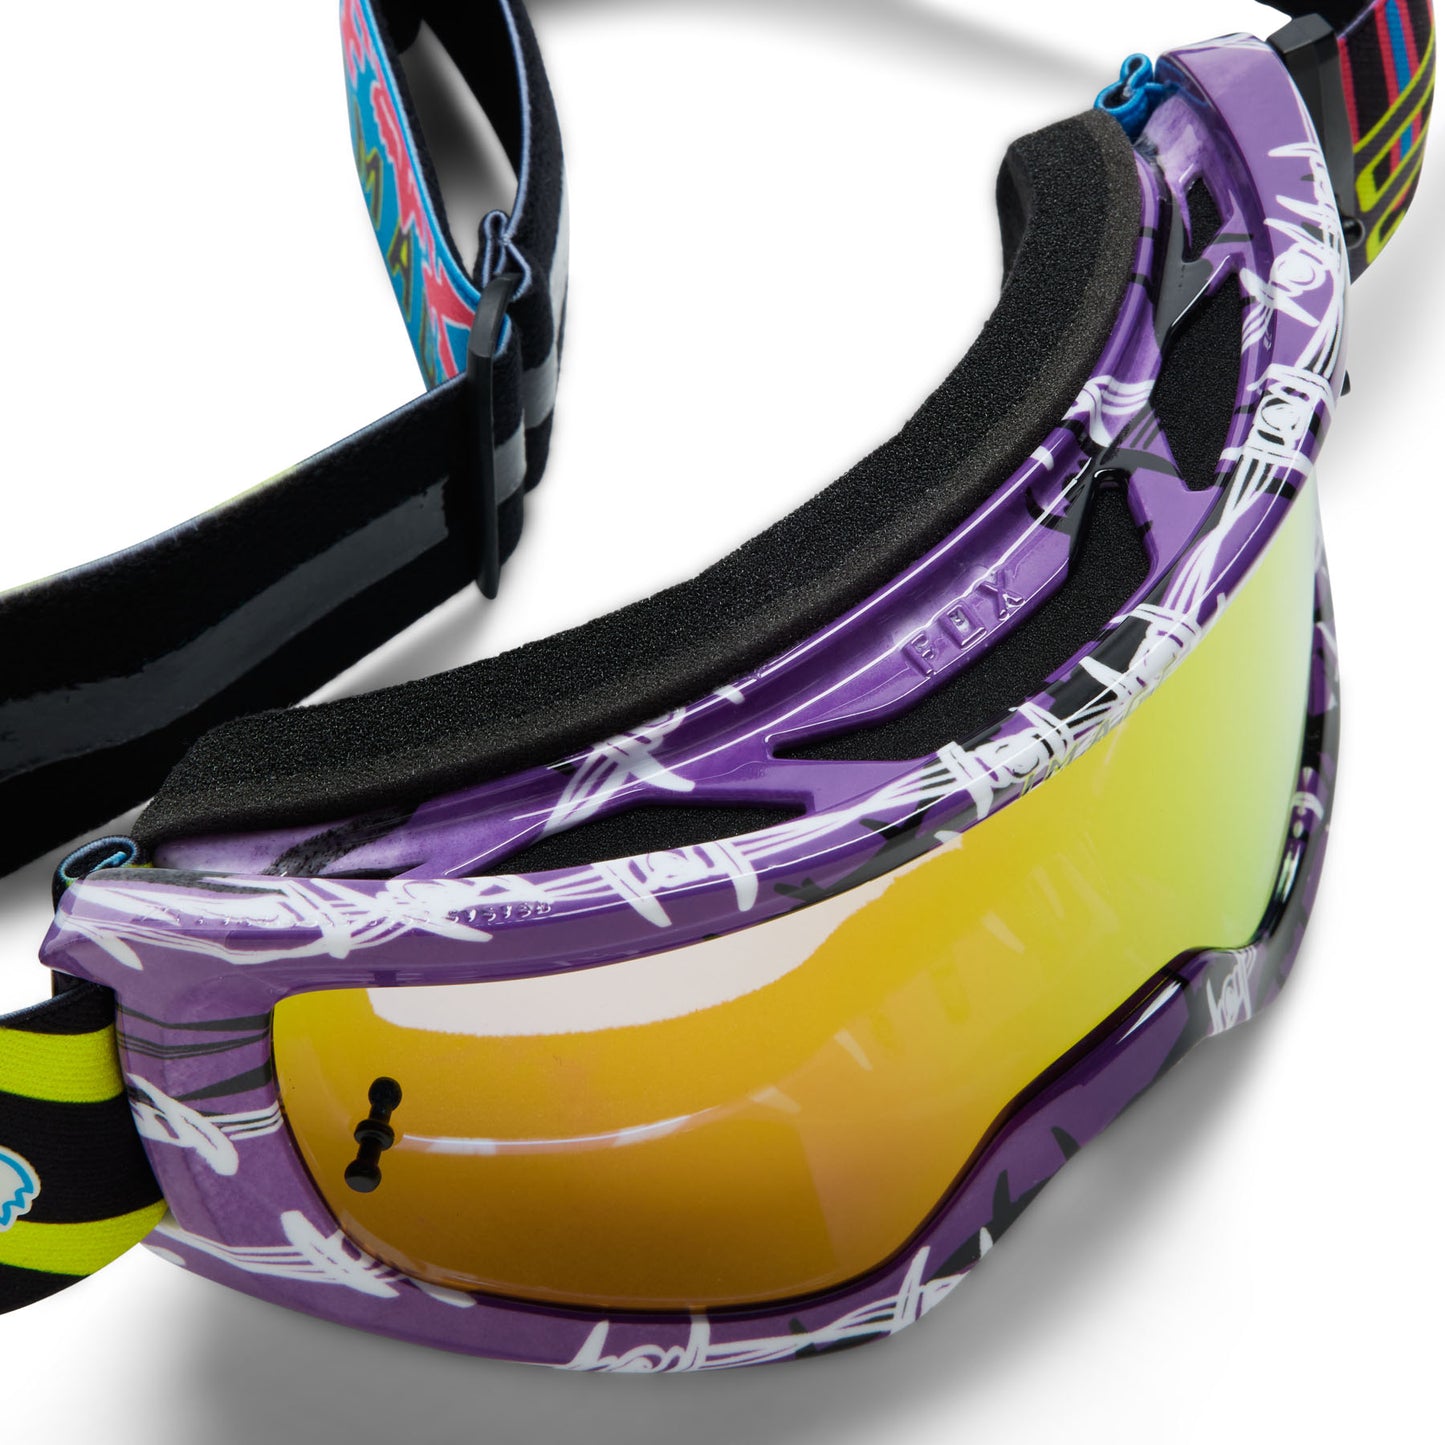 Fox Main Barbed Wire SE Goggles - One Size Fits Most - Purple - Grey Mirror Lens